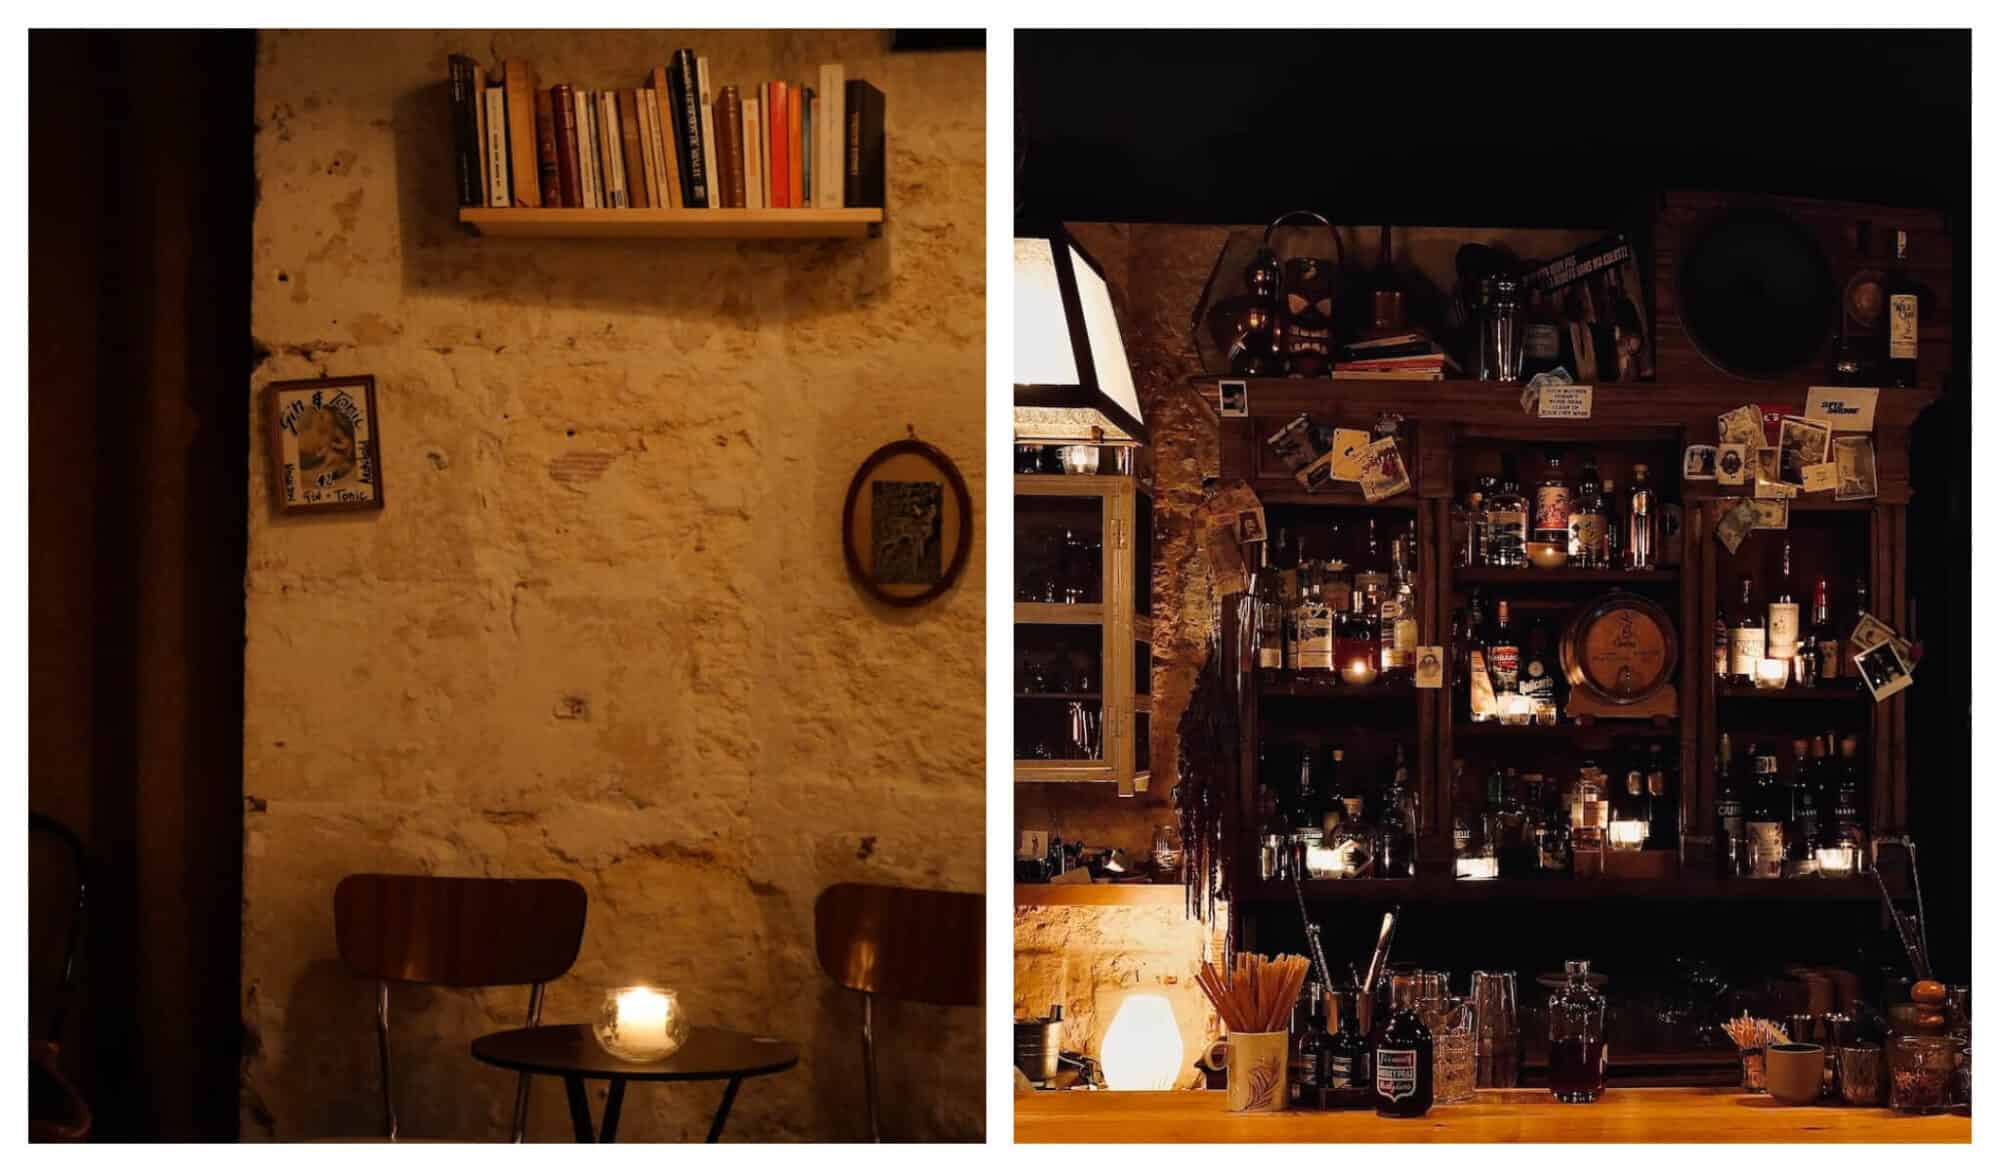 Left: Two wooden chairs at a small wooden table with a candle on it are just next to the light brick wall in CanCan. Right: A dark shot of the bar in CanCan, complete with liqour, wine, and glasses.